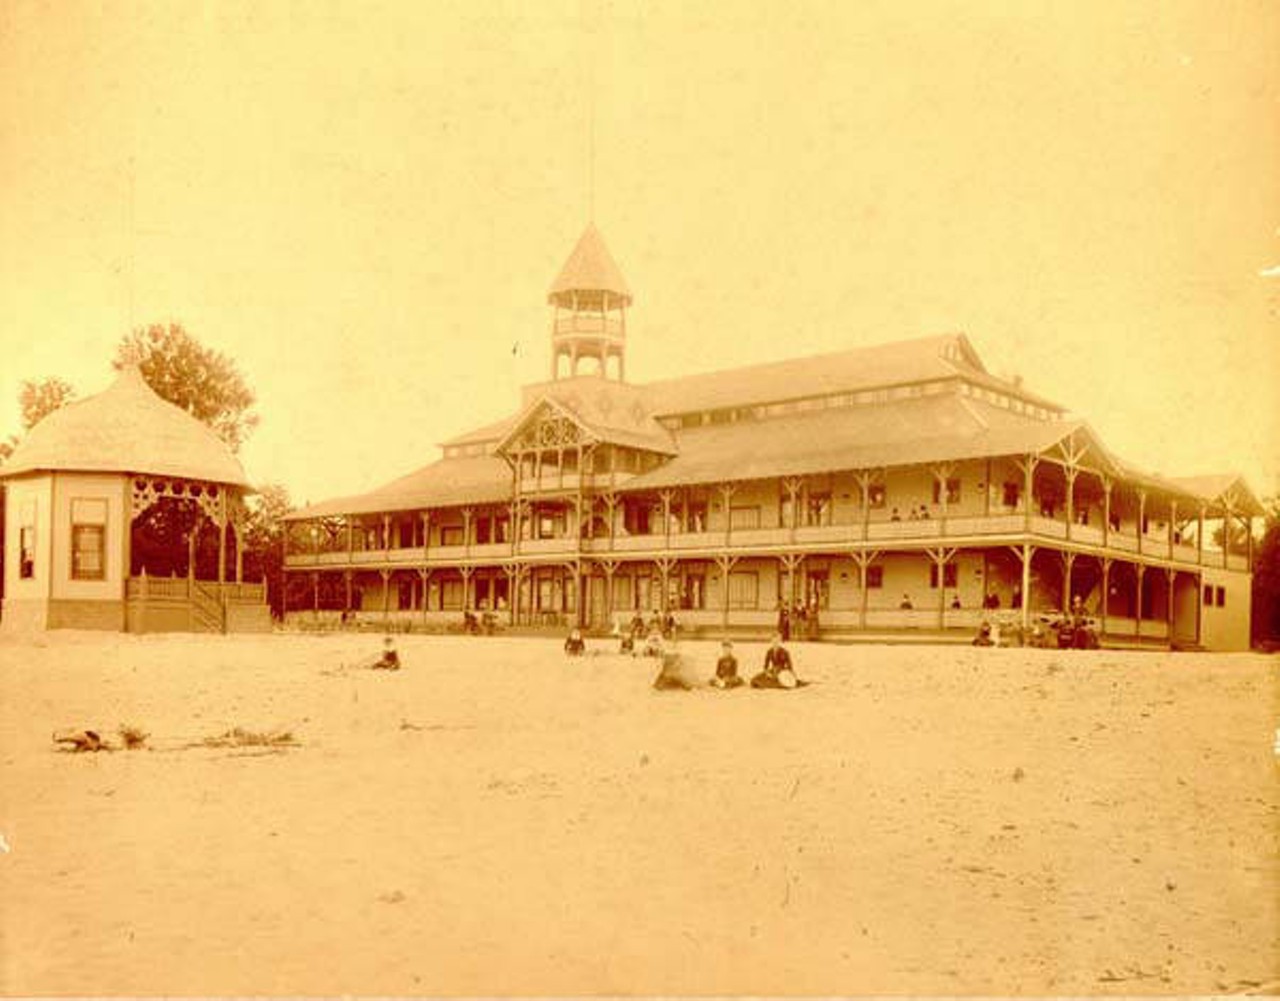  Grand Pavilion, Beach and Bandstand, 1895 